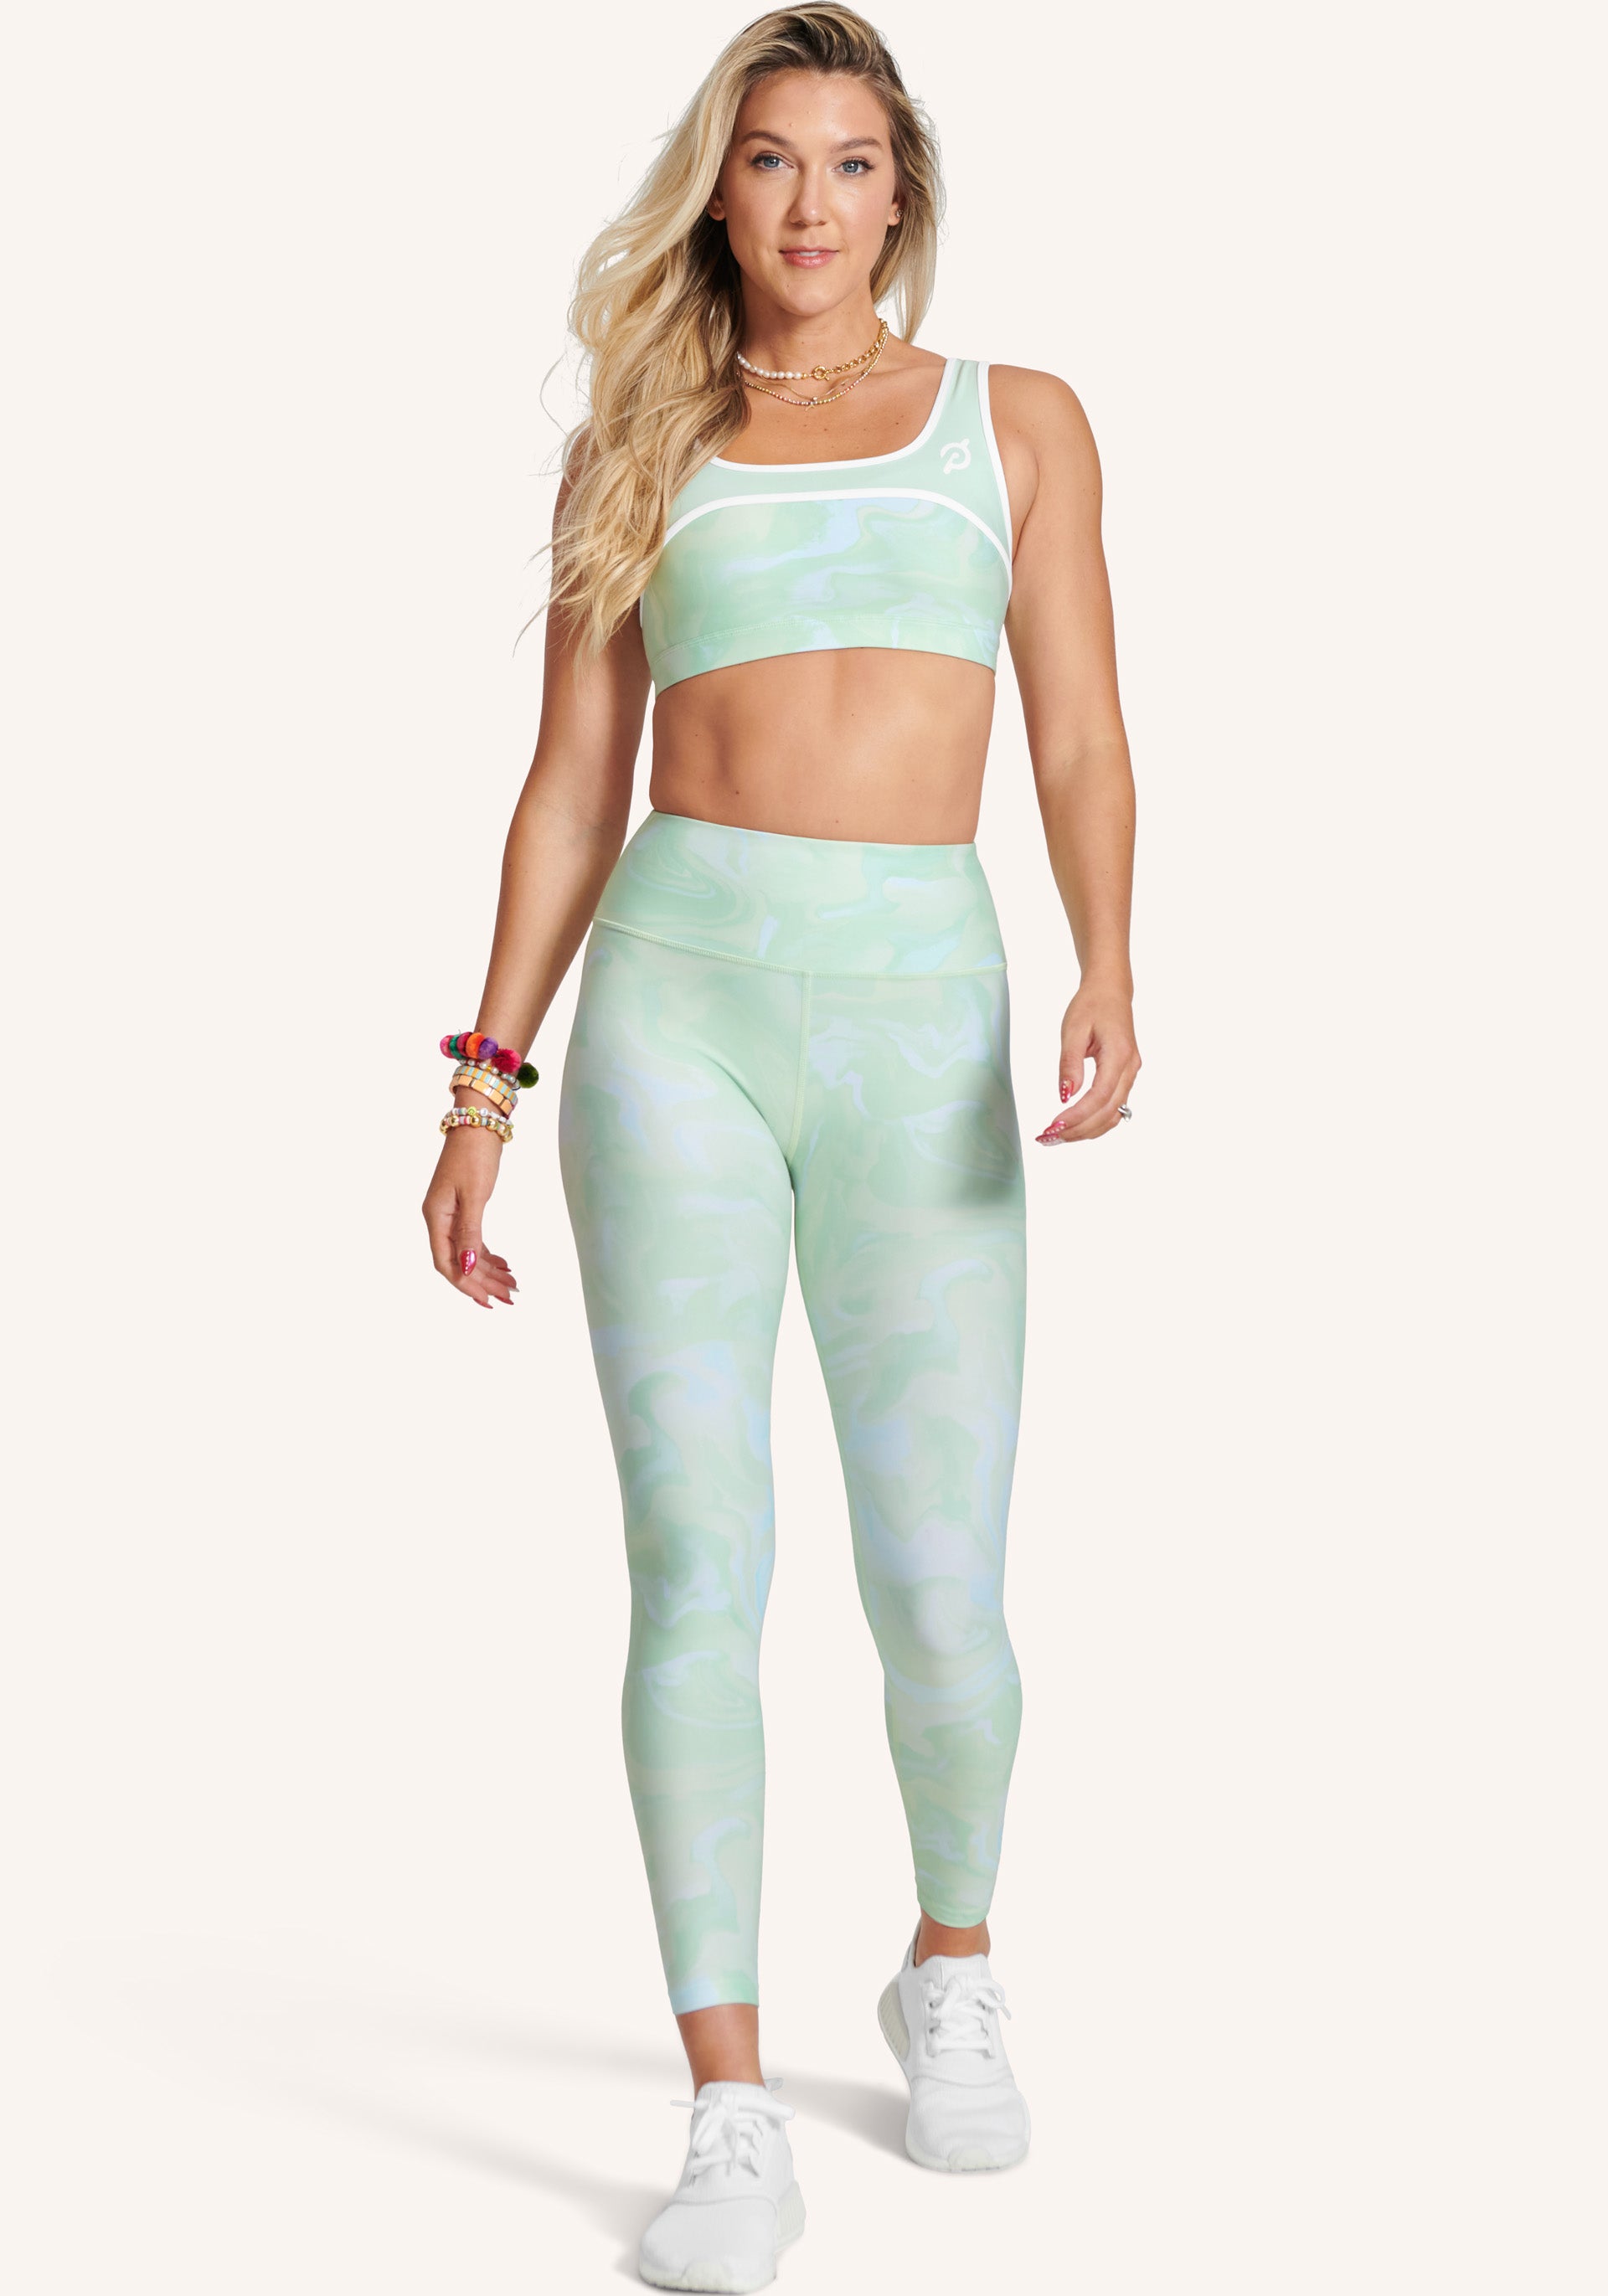 Adidas X Peloton Leggings Multiple Size XS - $65 (23% Off Retail) New With  Tags - From Camila